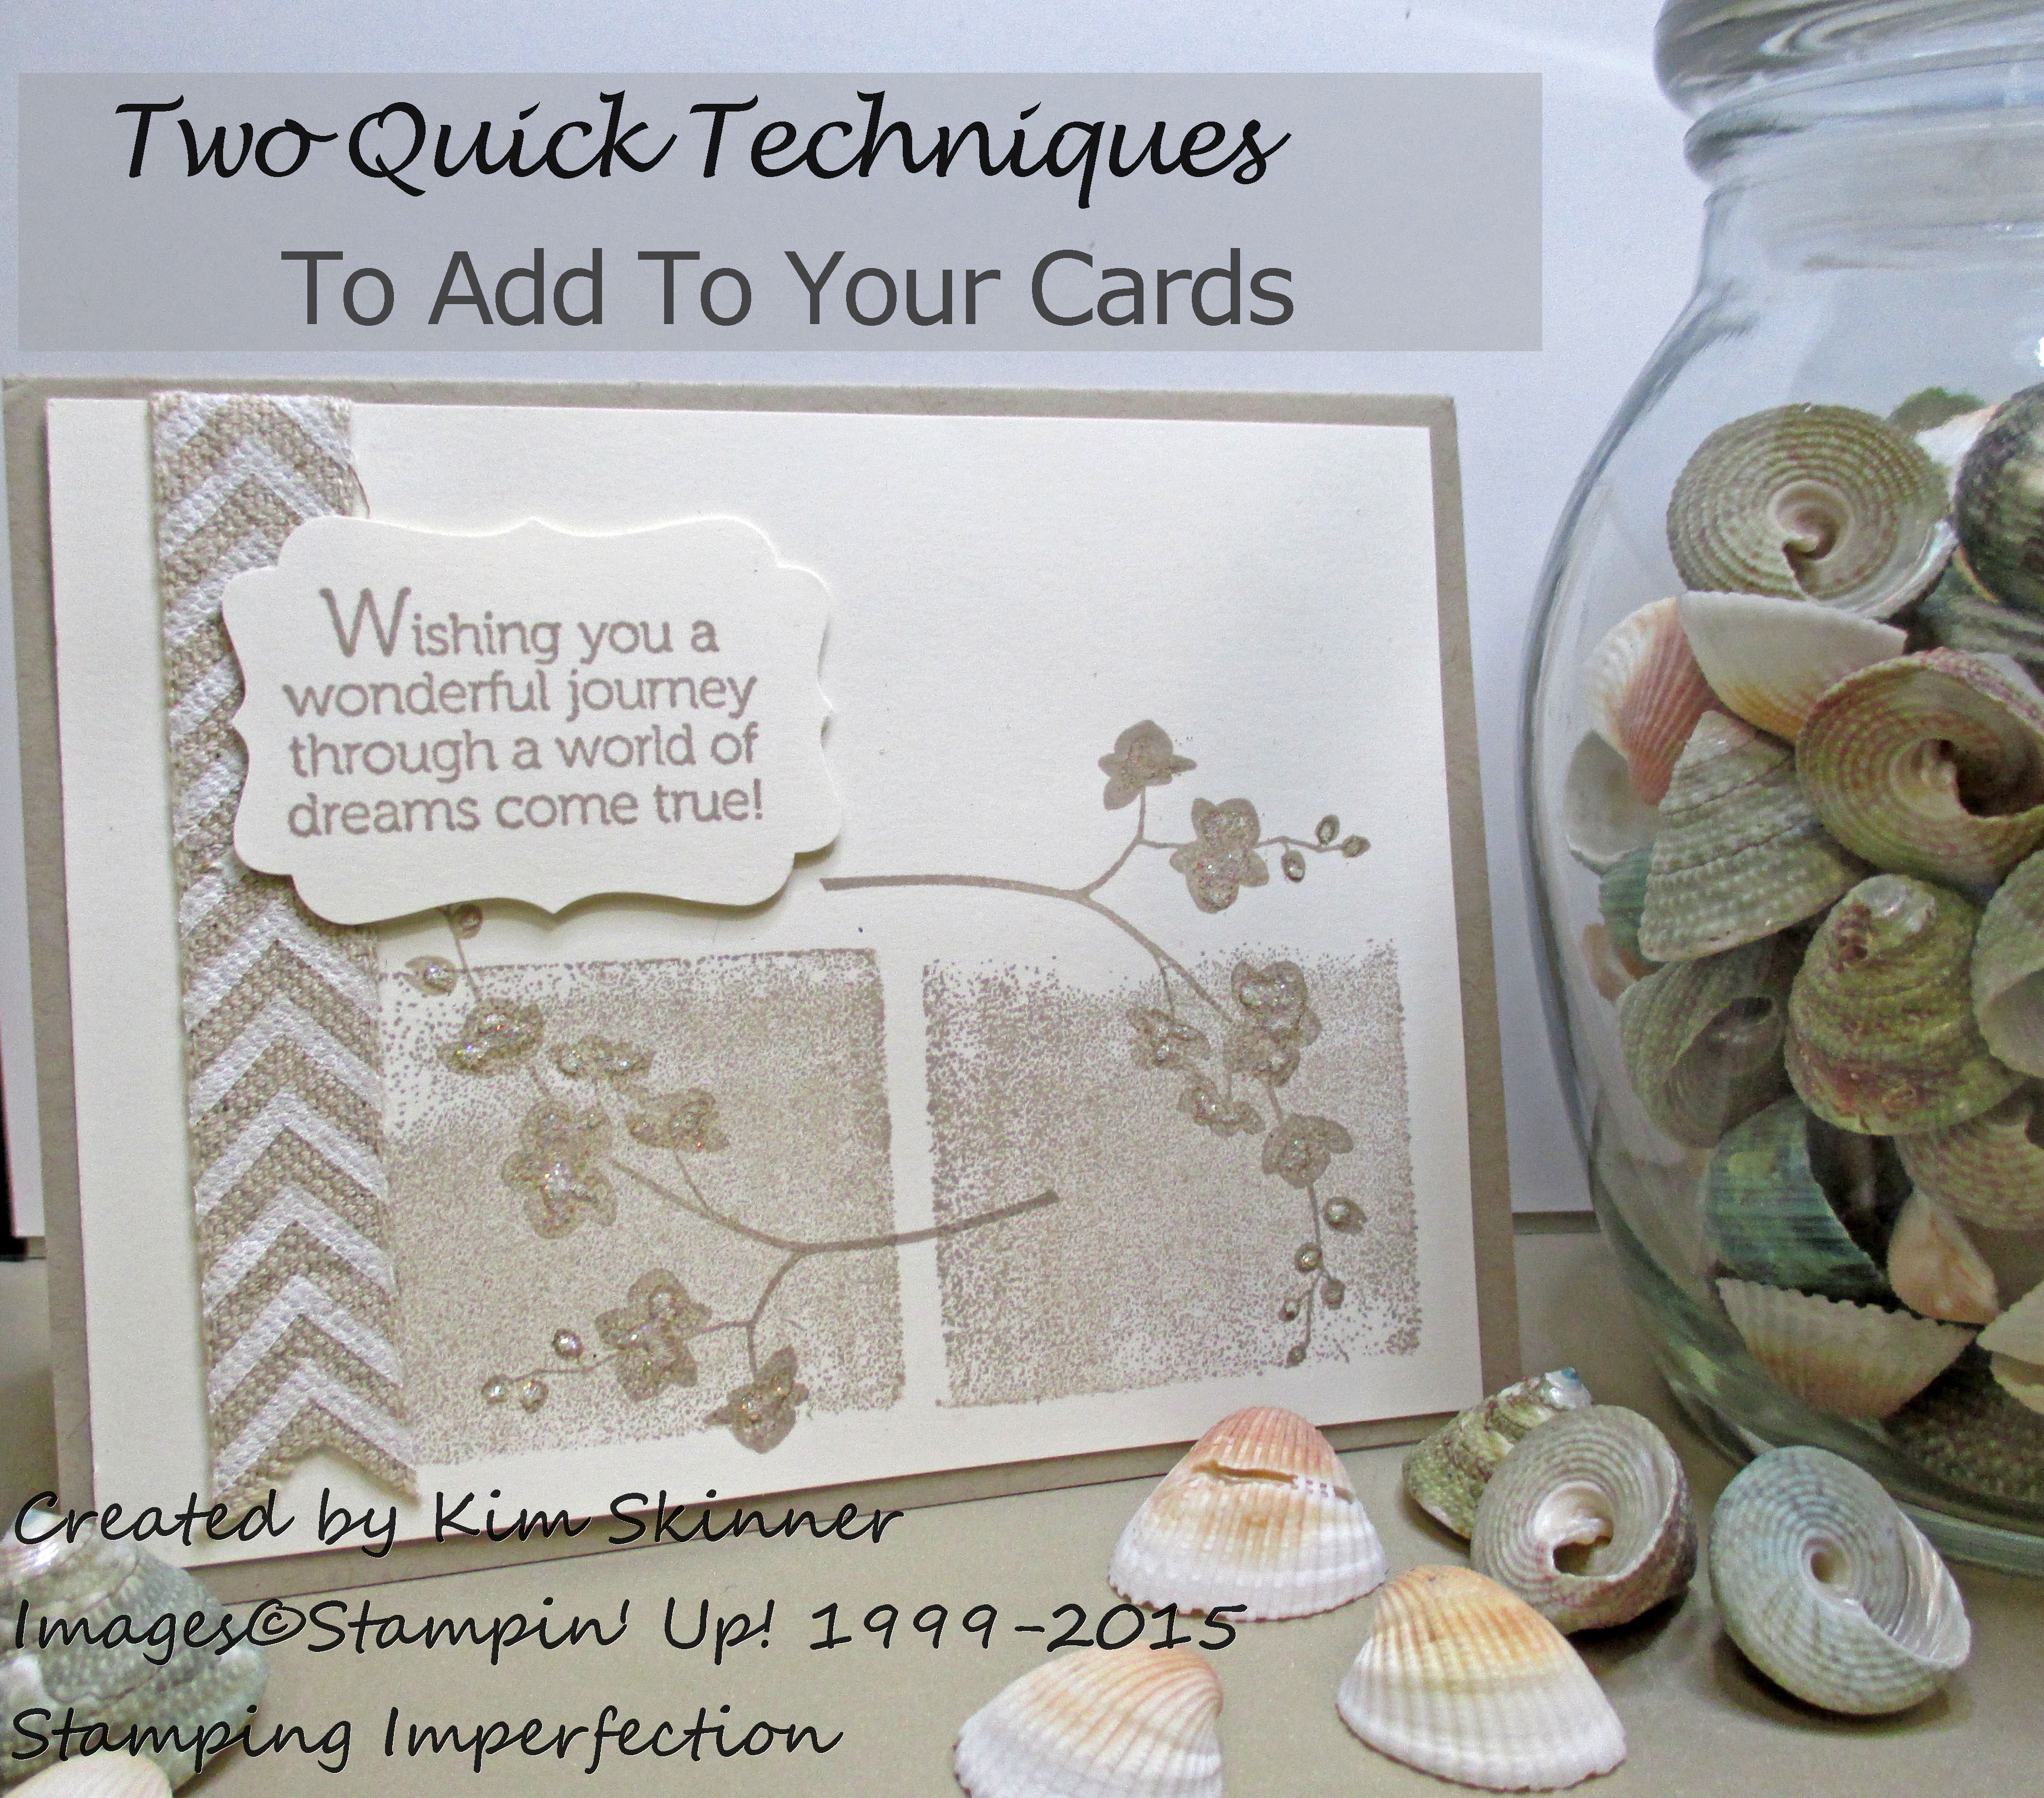 Two quick techniques to add WOW touches to your cards + video tutorial from stamping imperfection